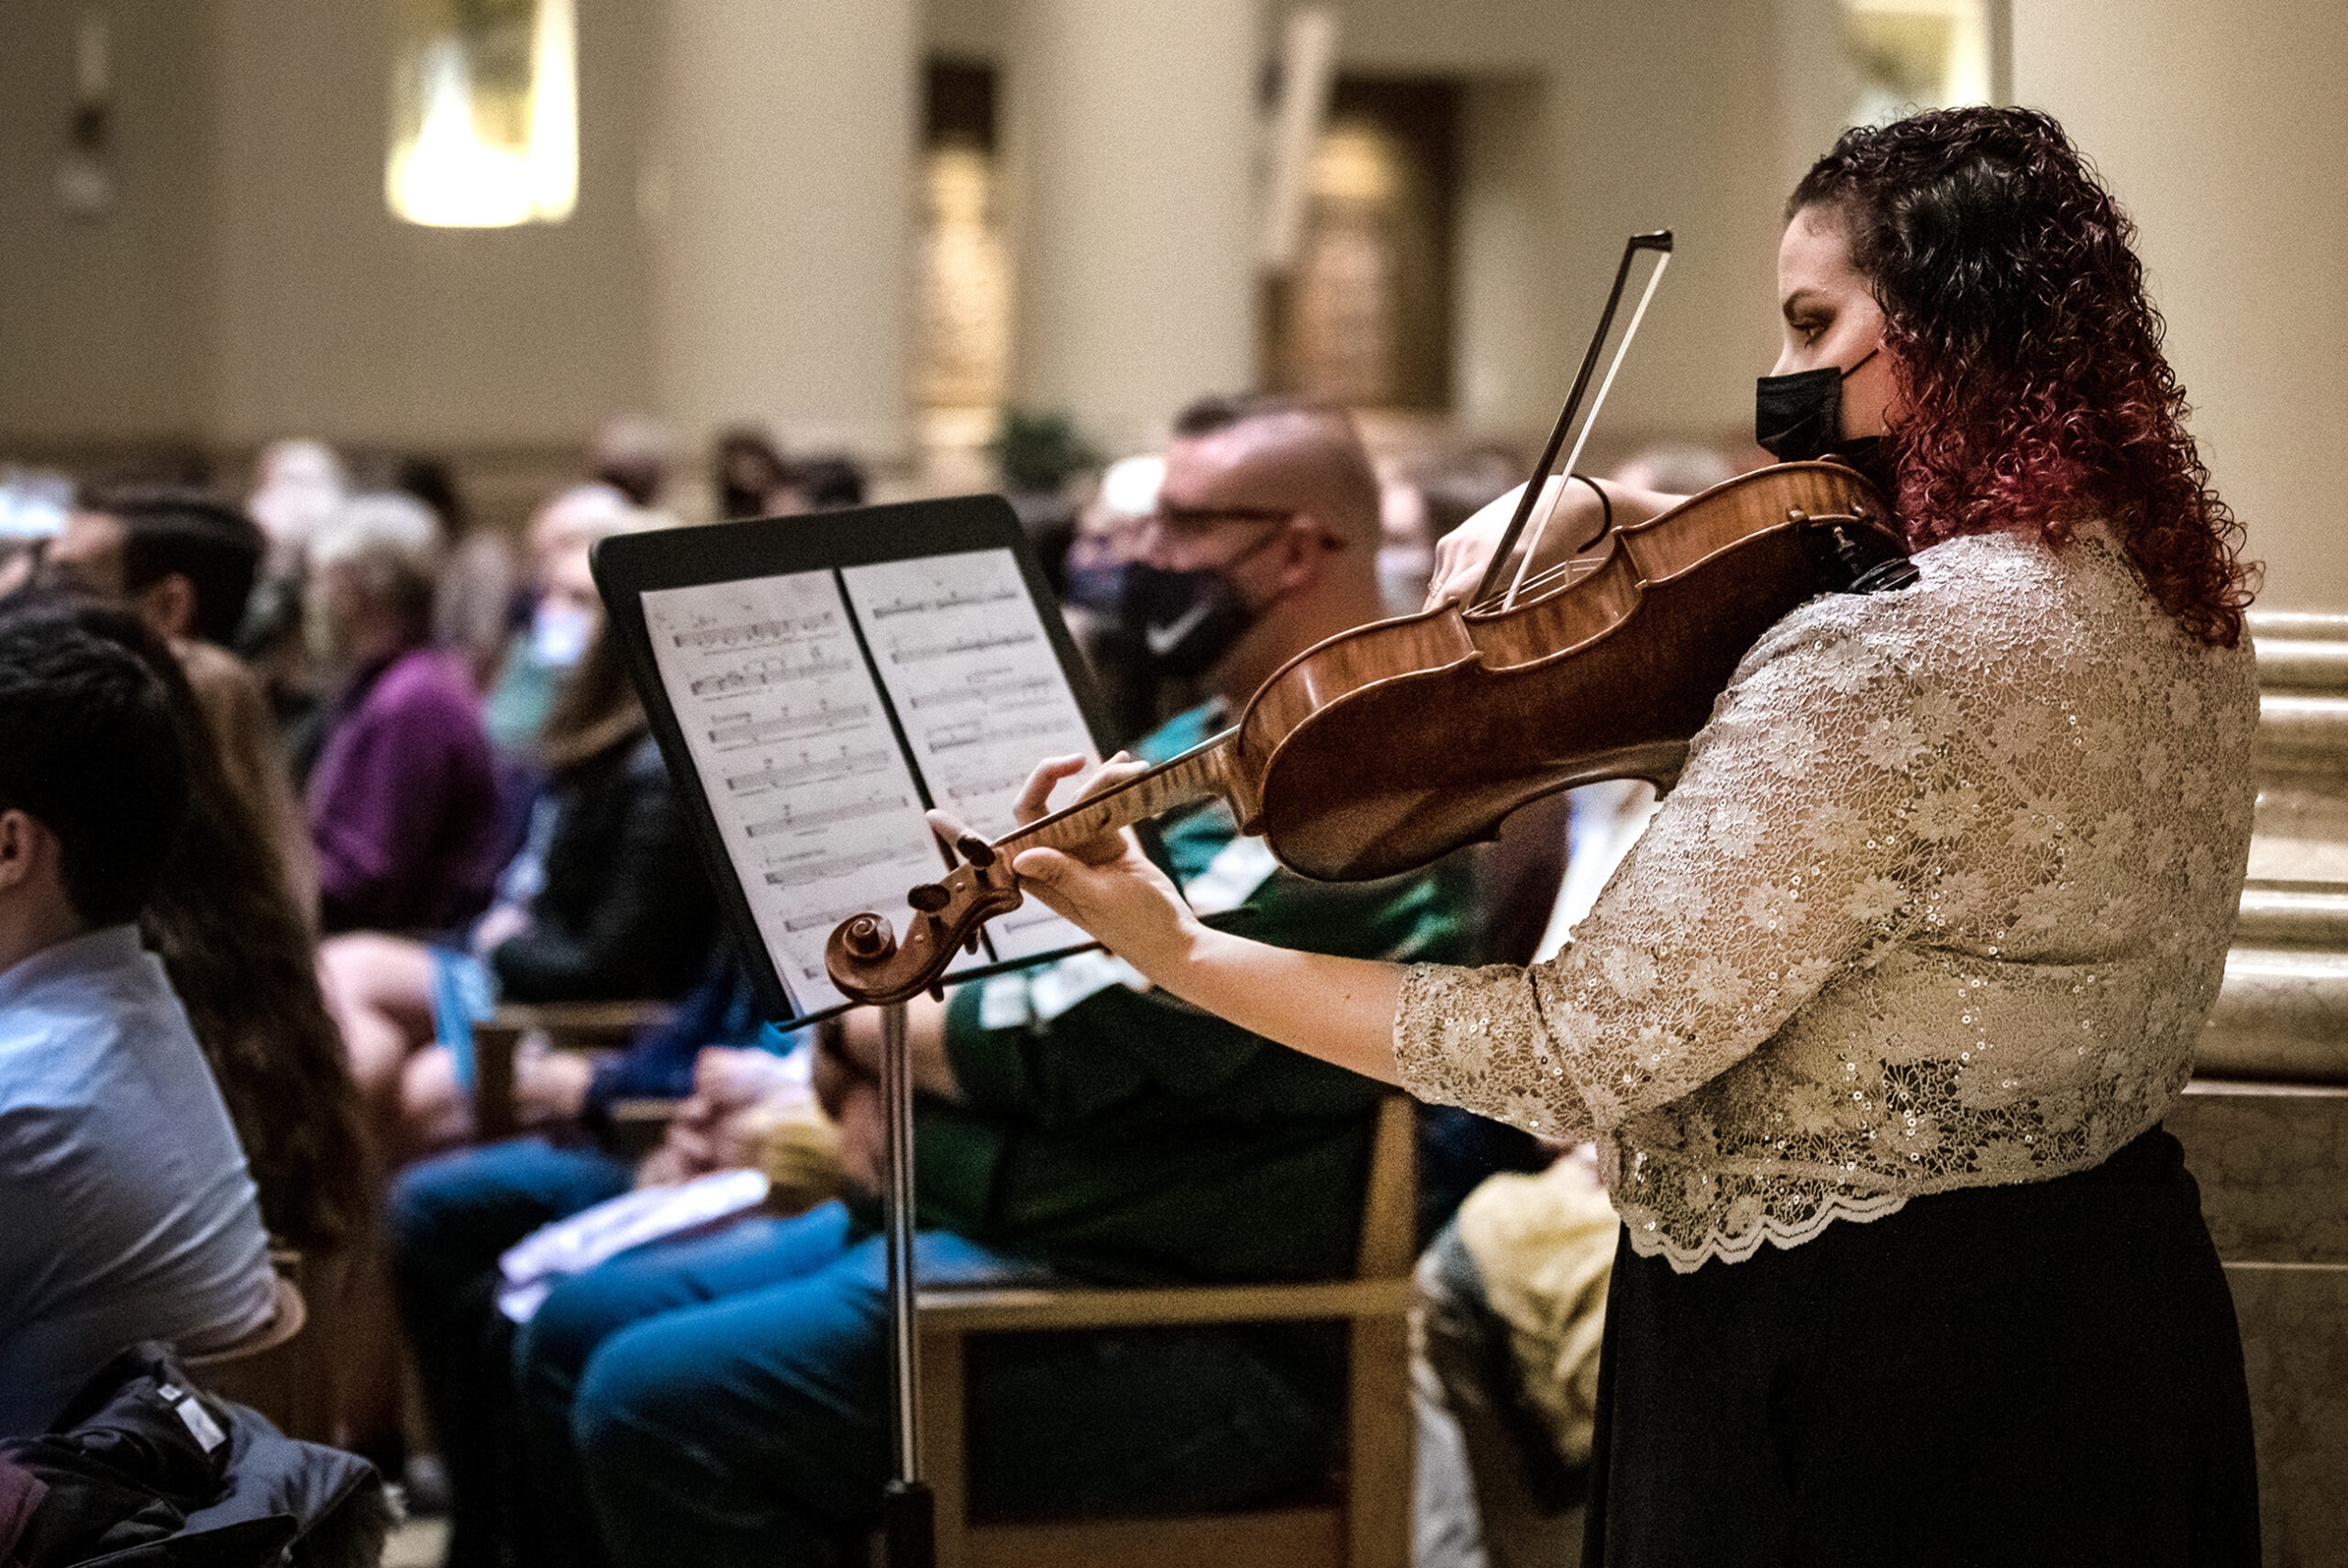 A woman plays a viola among the crowd listening to a performance in a church